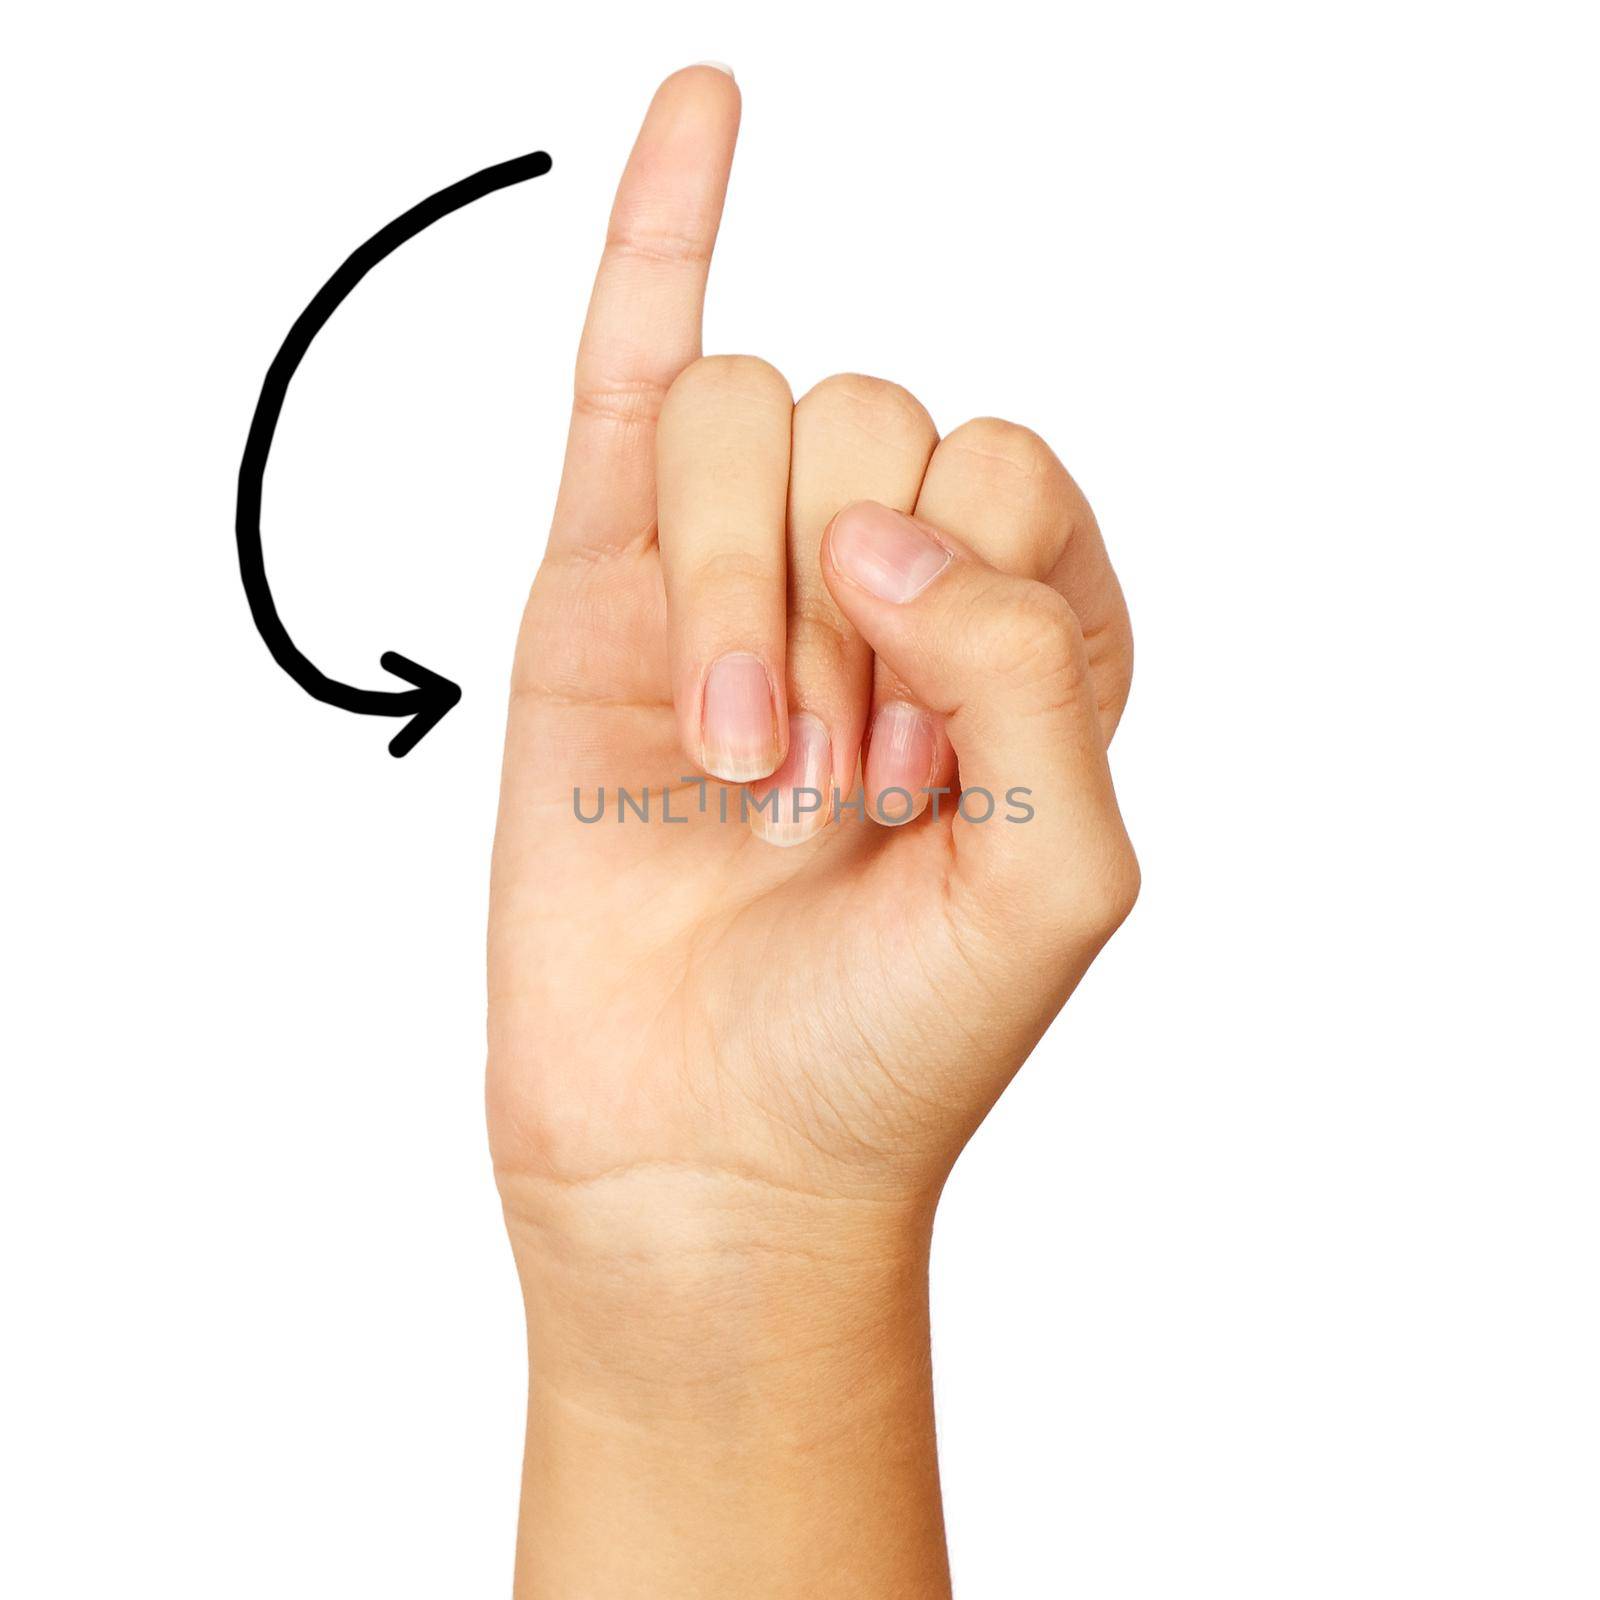 american sign language. female hand showing letter j. isolated on white background